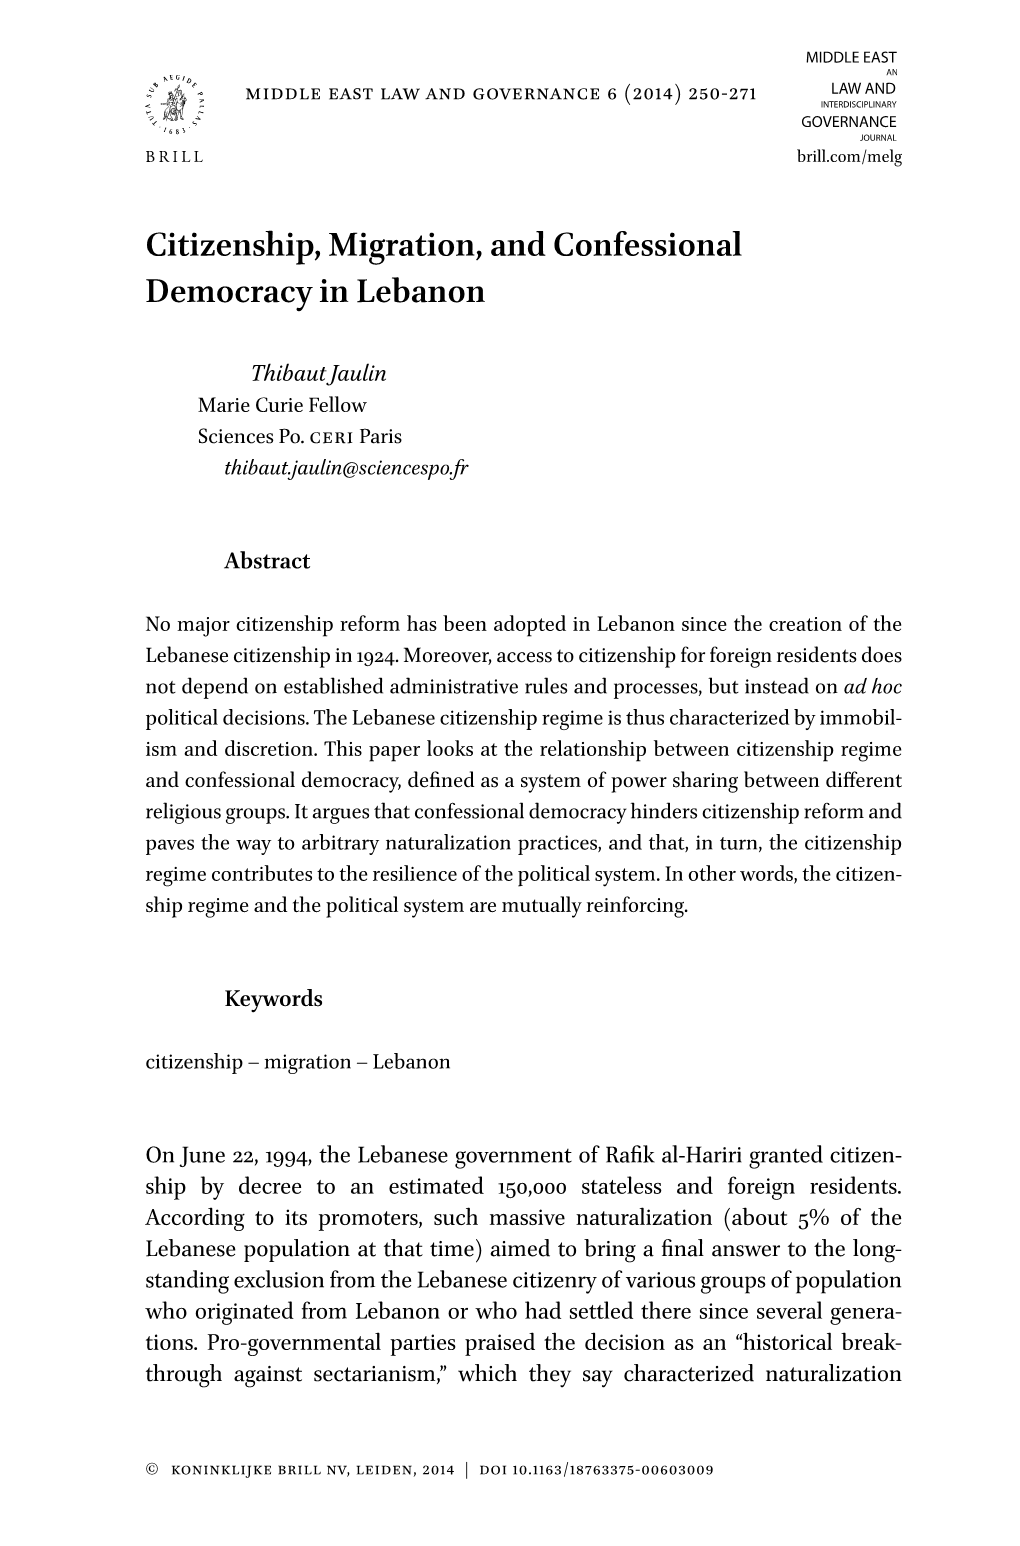 Citizenship, Migration, and Confessional Democracy in Lebanon